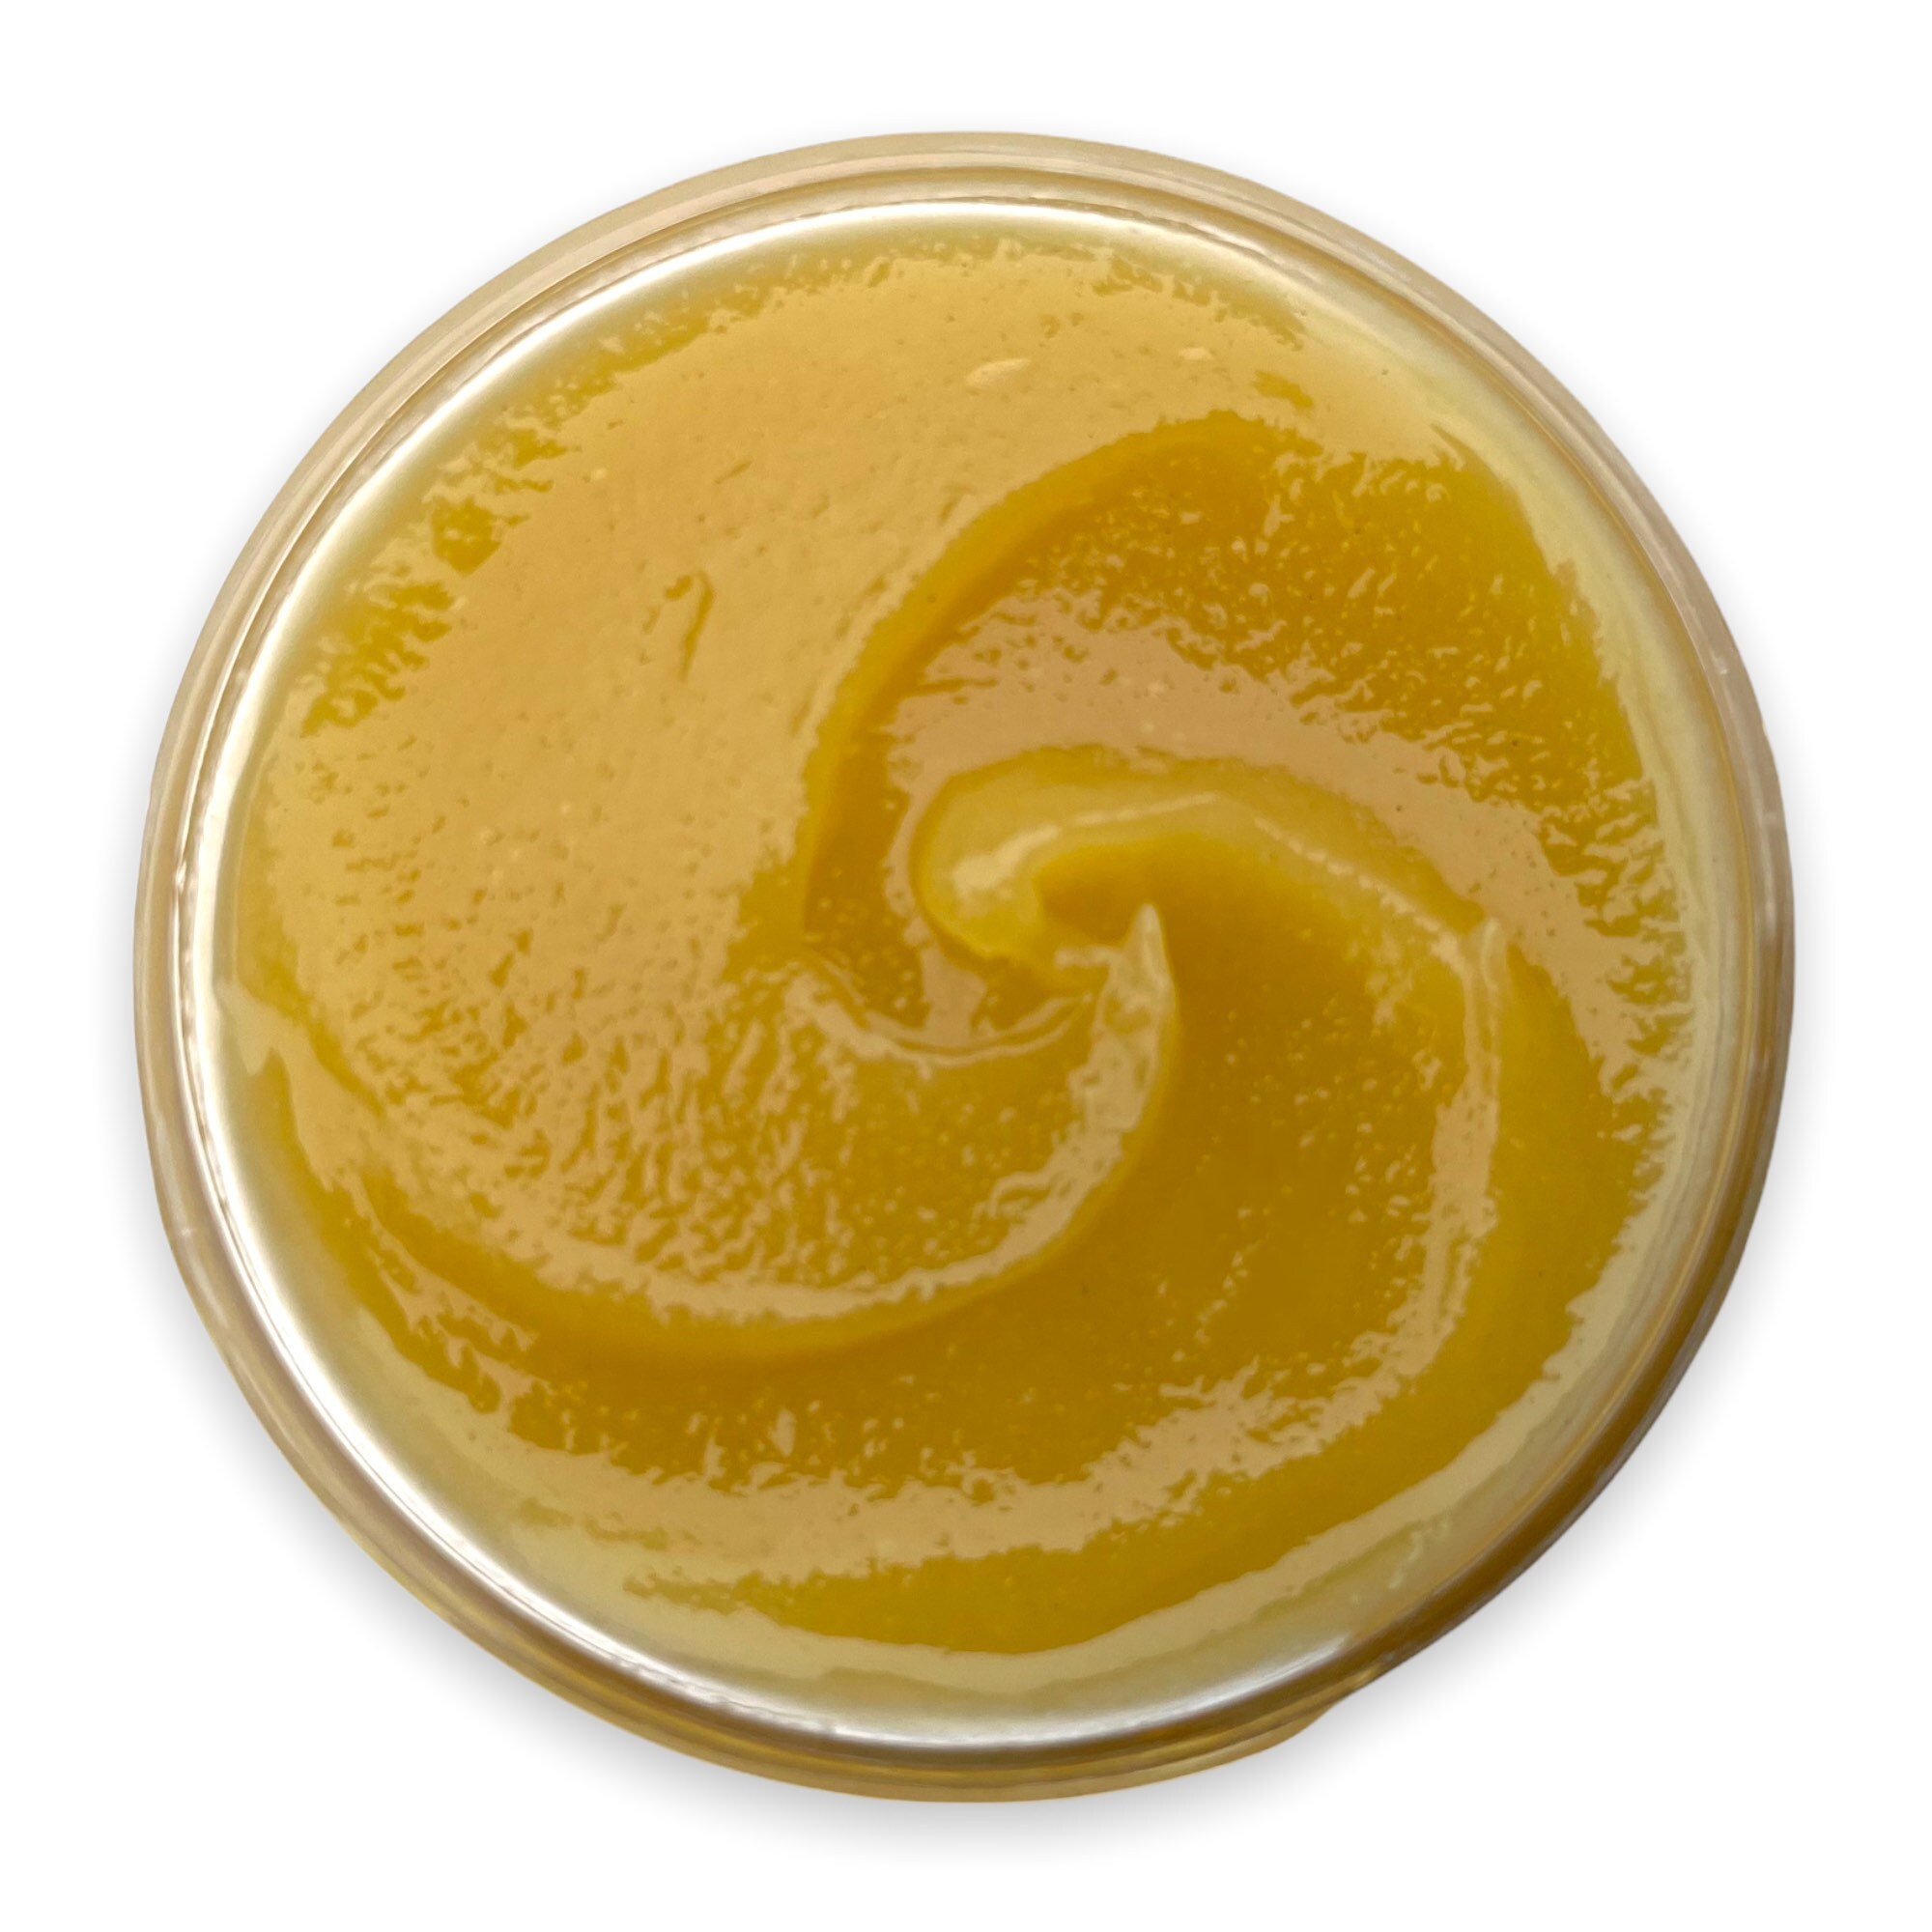 Herbogen Herbal Hair Balm With Beeswax, Herbal Styling Wax, Herbal Pomade,  Stinging Nettle - Asha + Miel Body Care